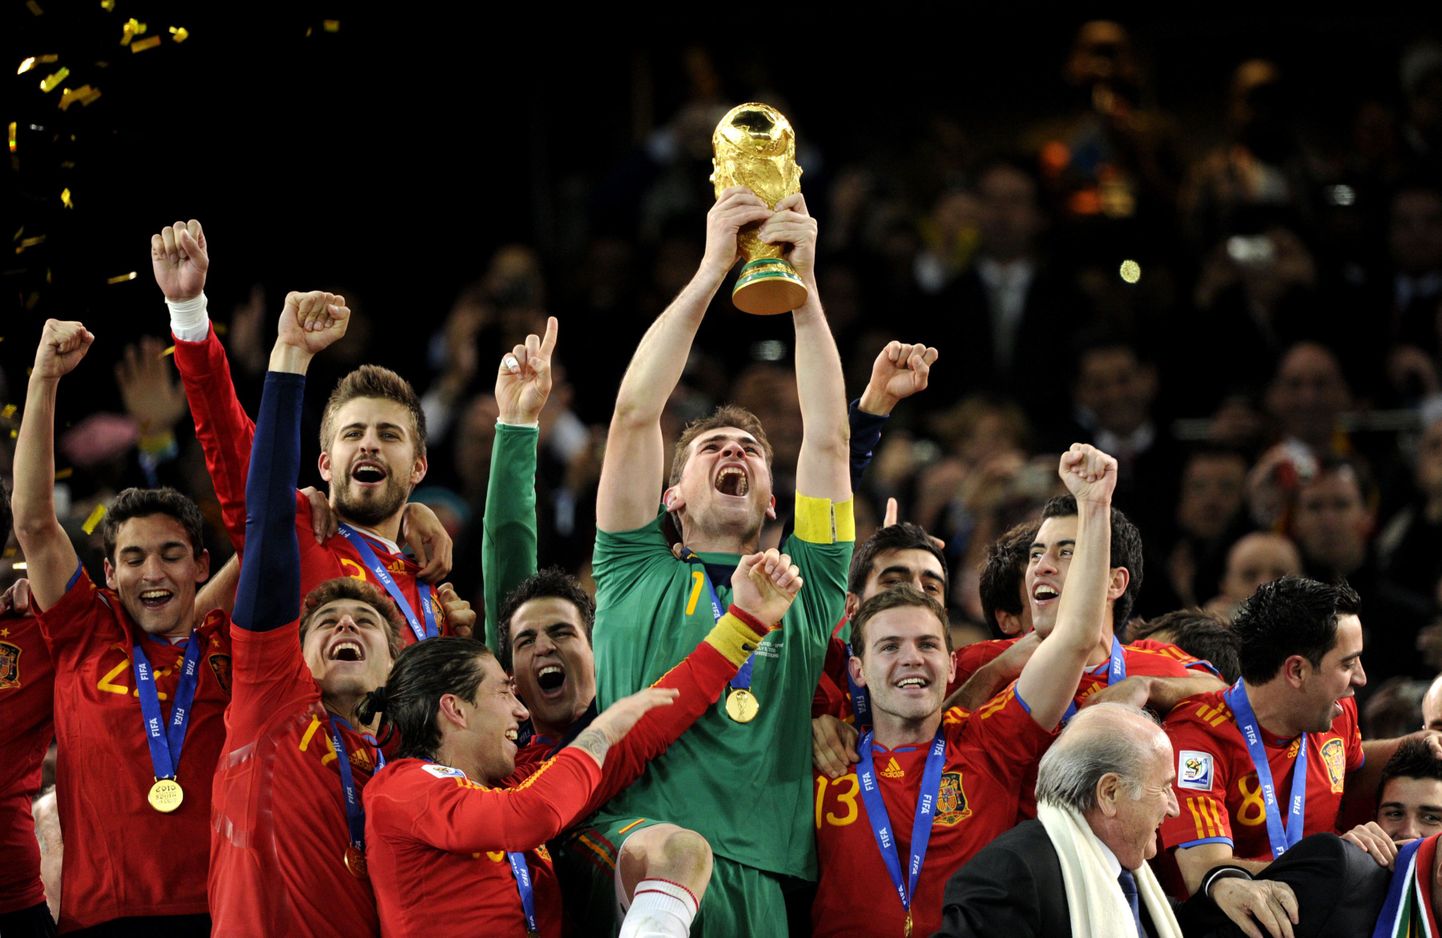 AFP PICTURE OF THE YEAR 2010
Spain's goalkeeper Iker Casillas holds the FIFA World Cup tropfy after winning the 2010 World Cup football final by defeating The Netherlands during extra time at Soccer City stadium in Soweto, suburban Johannesburg on July 11, 2010. NO PUSH TO MOBILE / MOBILE USE SOLELY WITHIN EDITORIAL ARTICLE -     AFP PHOTO / JAVIER SORIANO